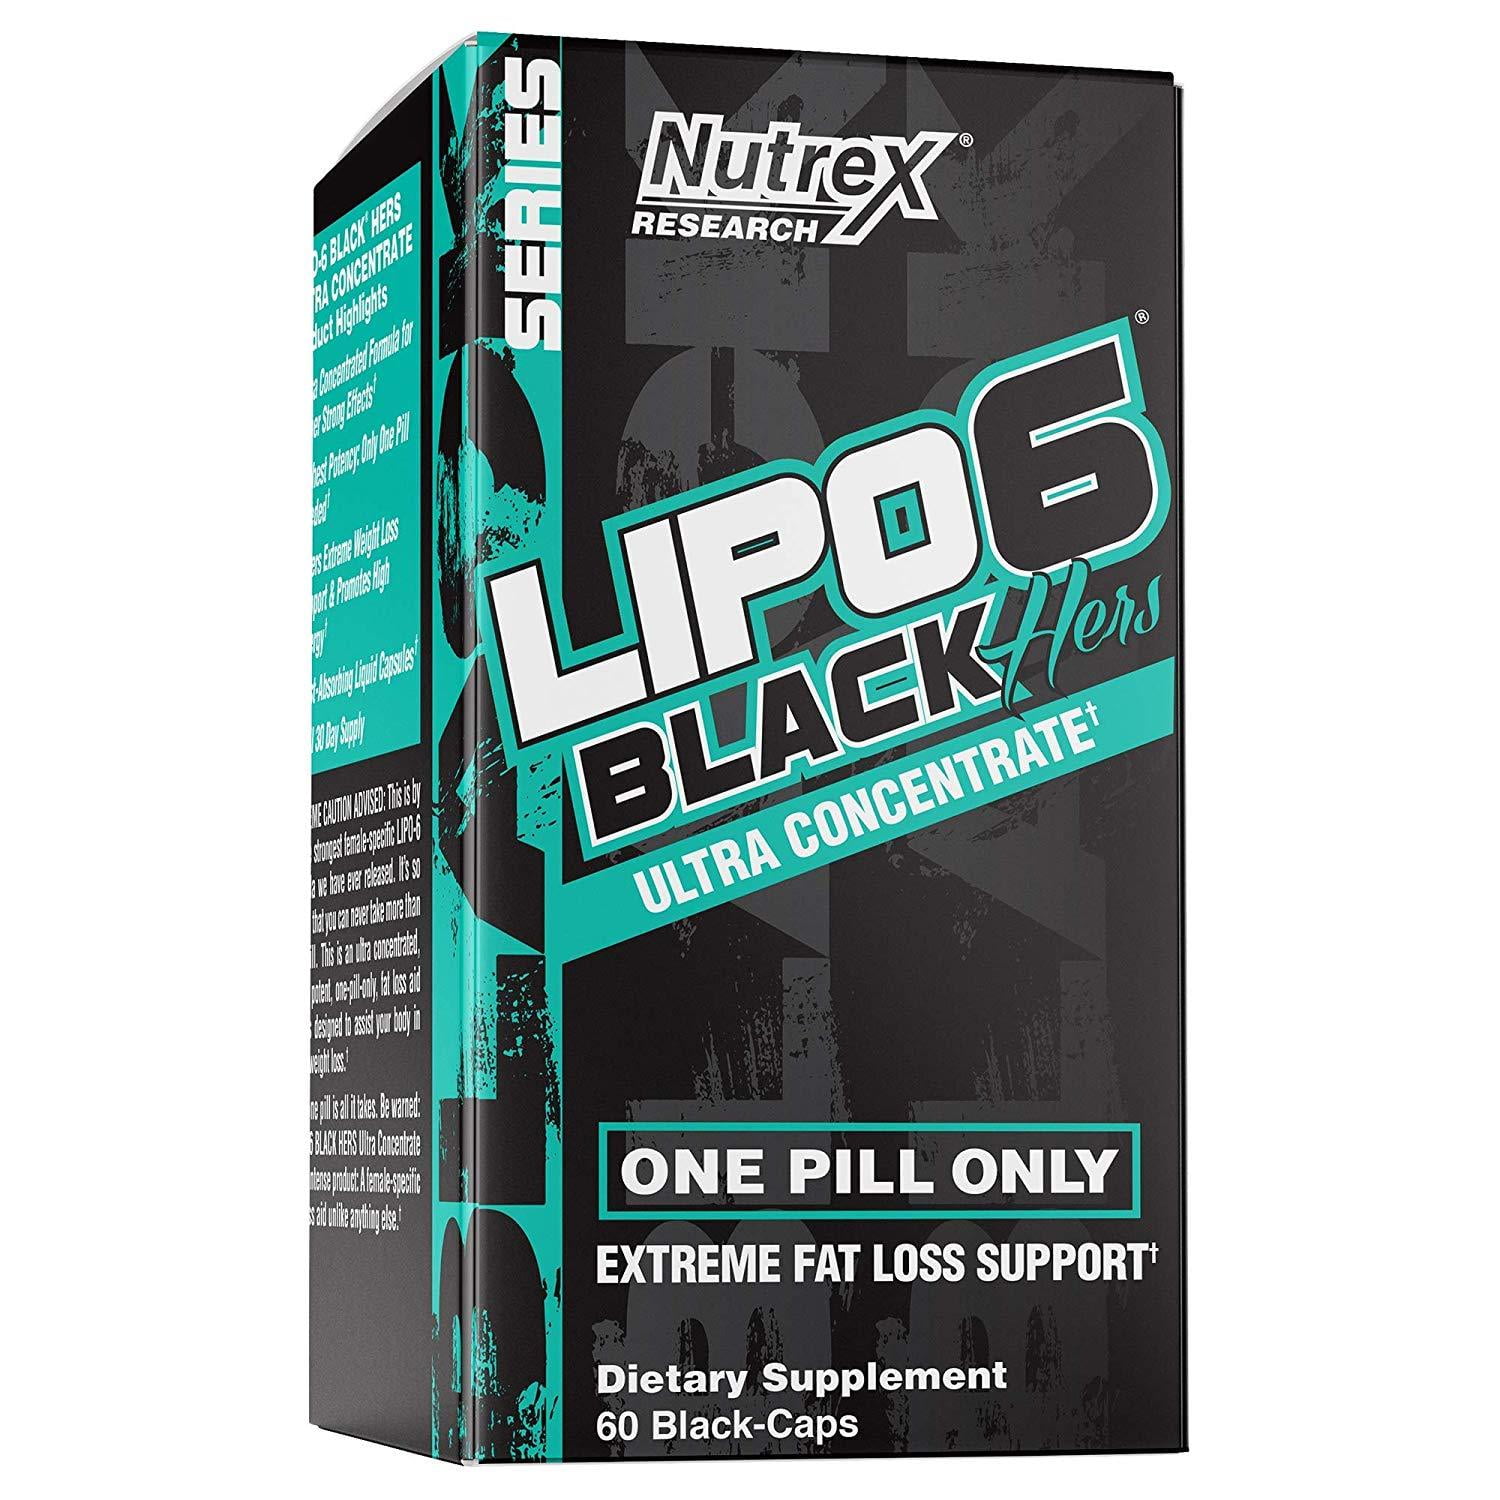 NUTREX LIPO 6 BLACK ULTRA CONCENTRATE 60 CAPS FAT BURNER WEIGHT LOSS 